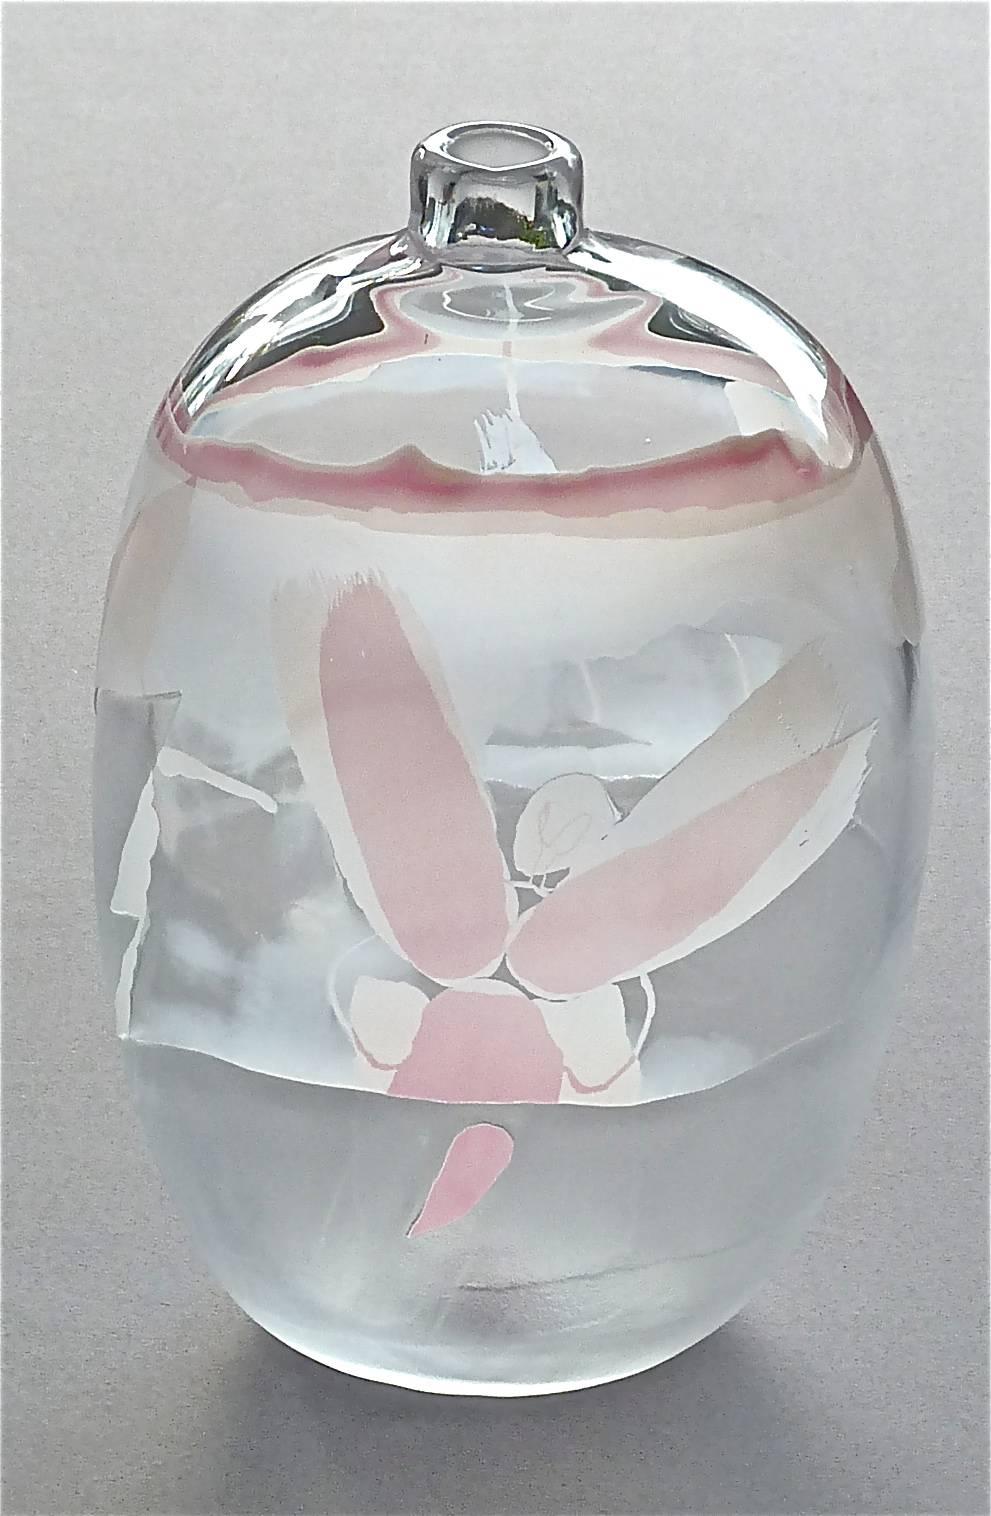 A beautiful art glass vase by Ann Warff for Kosta Boda, Sweden, 1975. Clear, milky white glass with pink, rose, deep-cut and polished, acid-etched with an abstract motive. Signed at the bottom Kosta, Unik for a unique piece, 1975, Ann Warff and